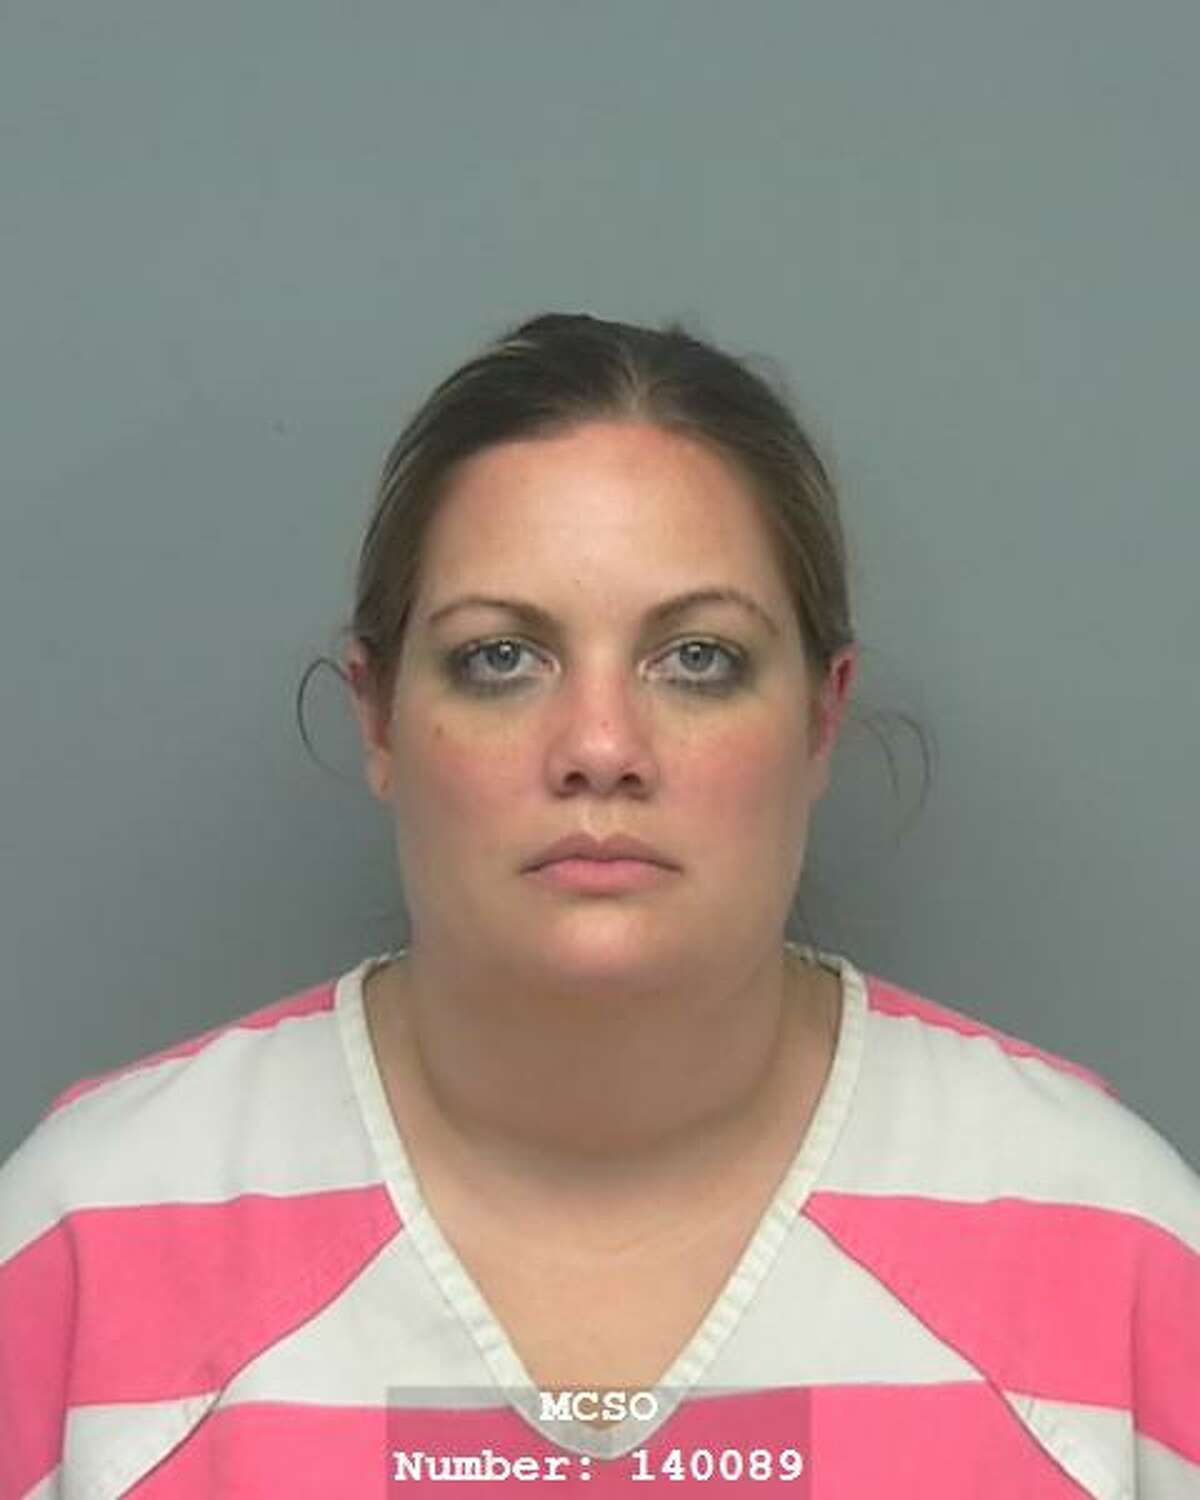 Denette Elizabeth Williams, 34, of Conroe, is charged with endangering a child, a state jail felony.